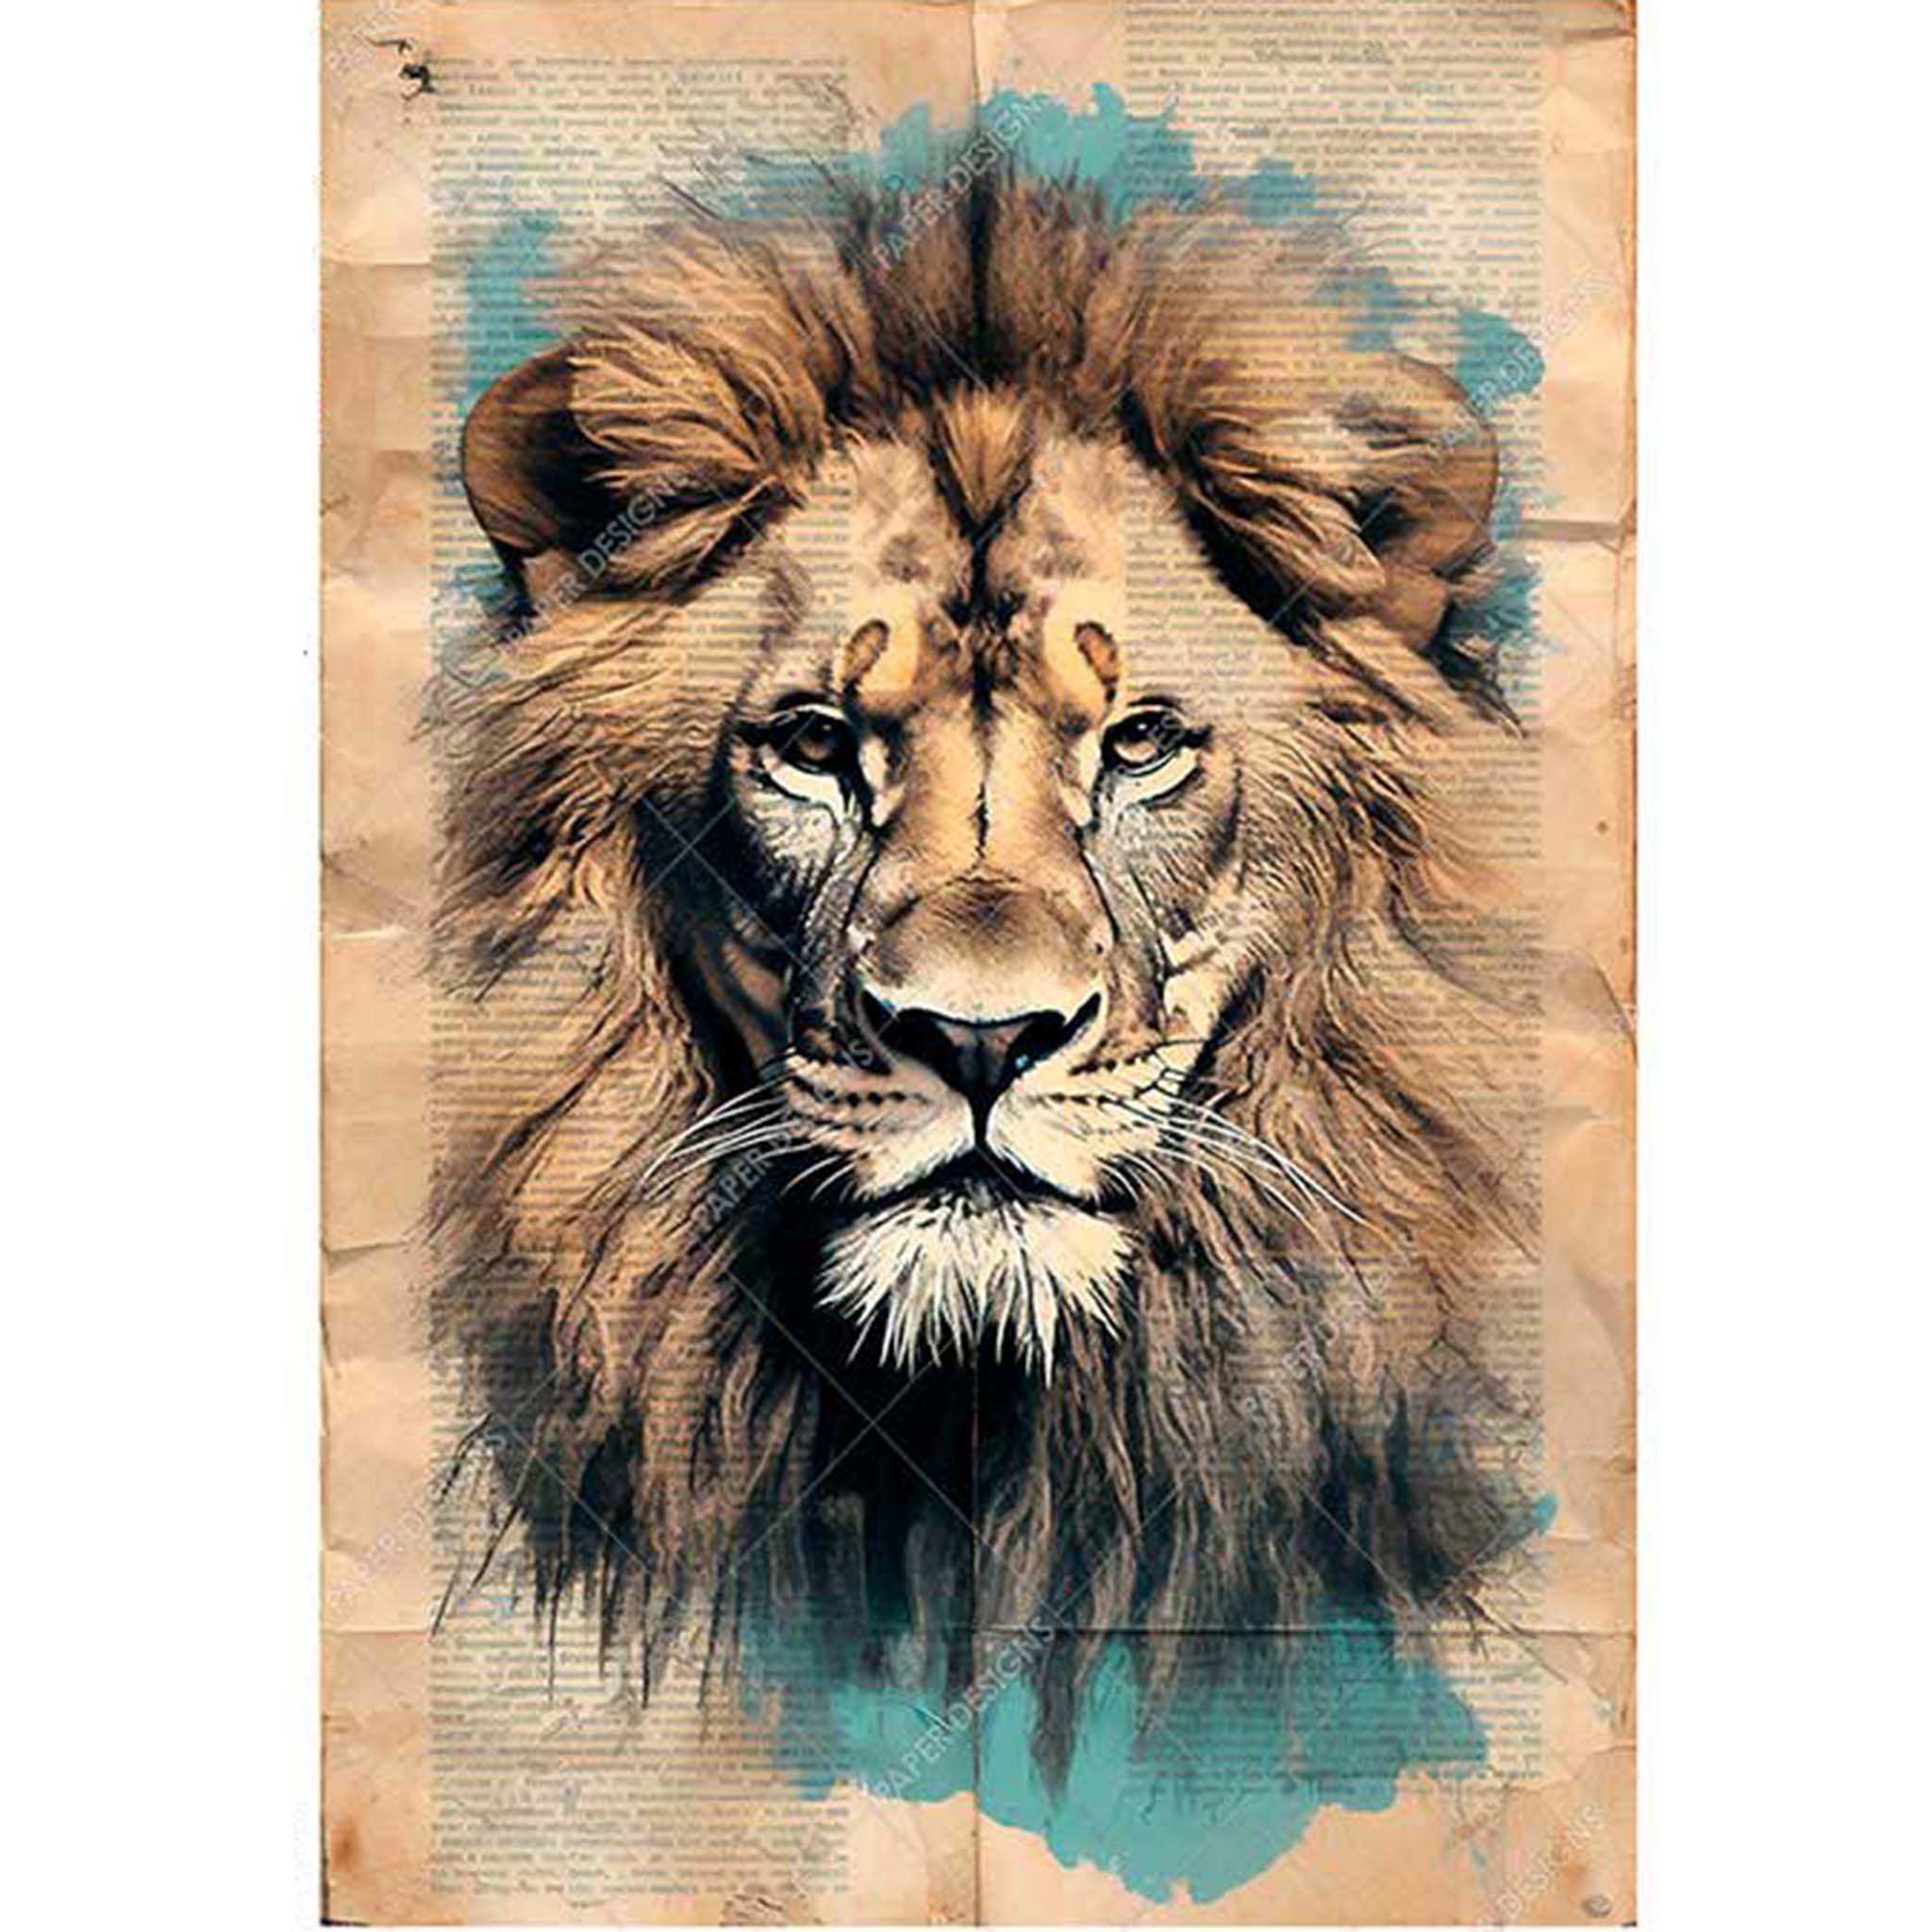 A1 rice paper design that features a vintage sepia tone background and a majestic lion. White borders are on the sides.